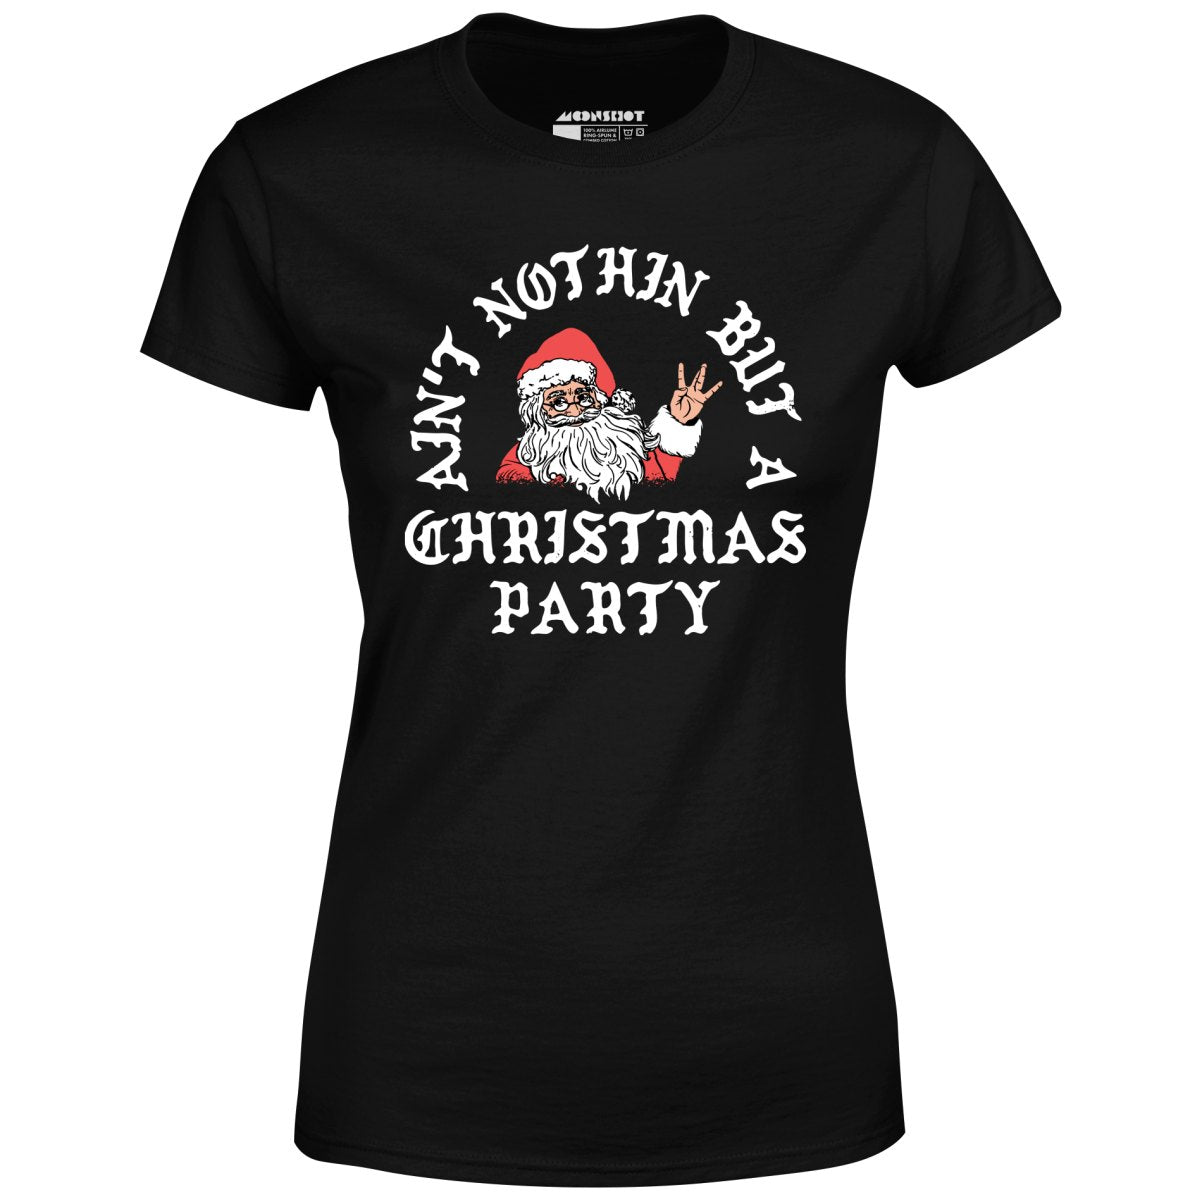 Ain't Nothin' But a Christmas Party - Women's T-Shirt